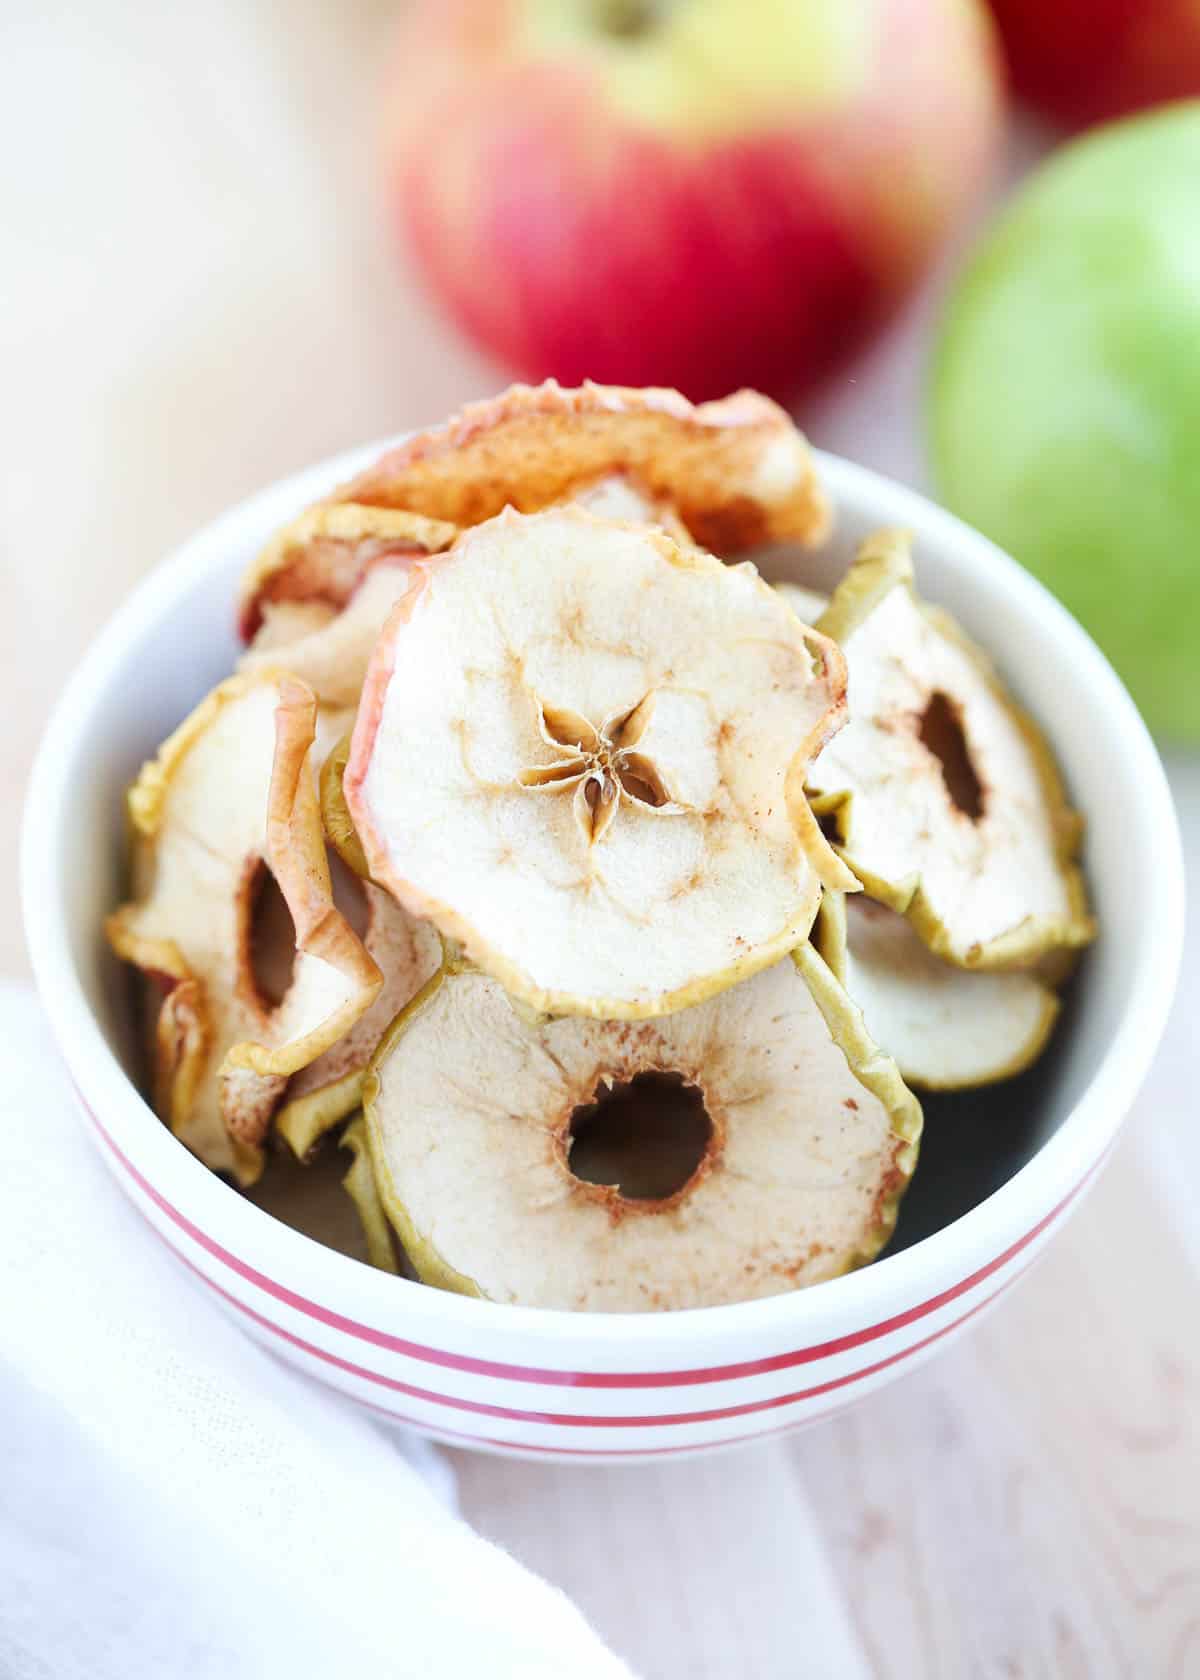 Apple chips in a red and white bowl.